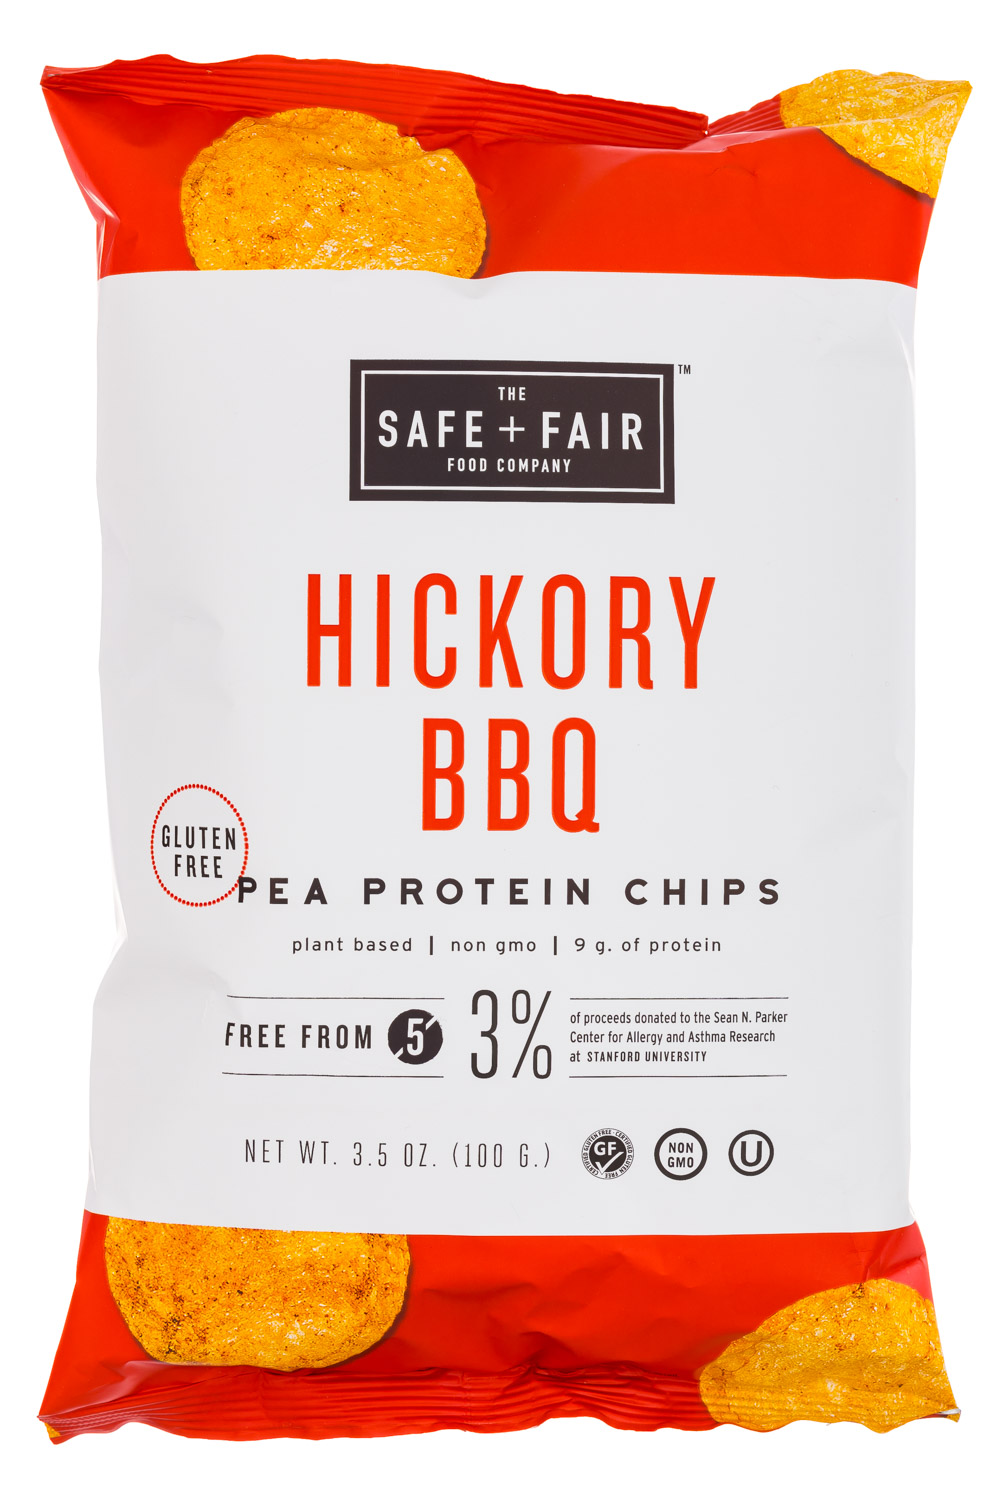 Hickory BBQ Protein Chips